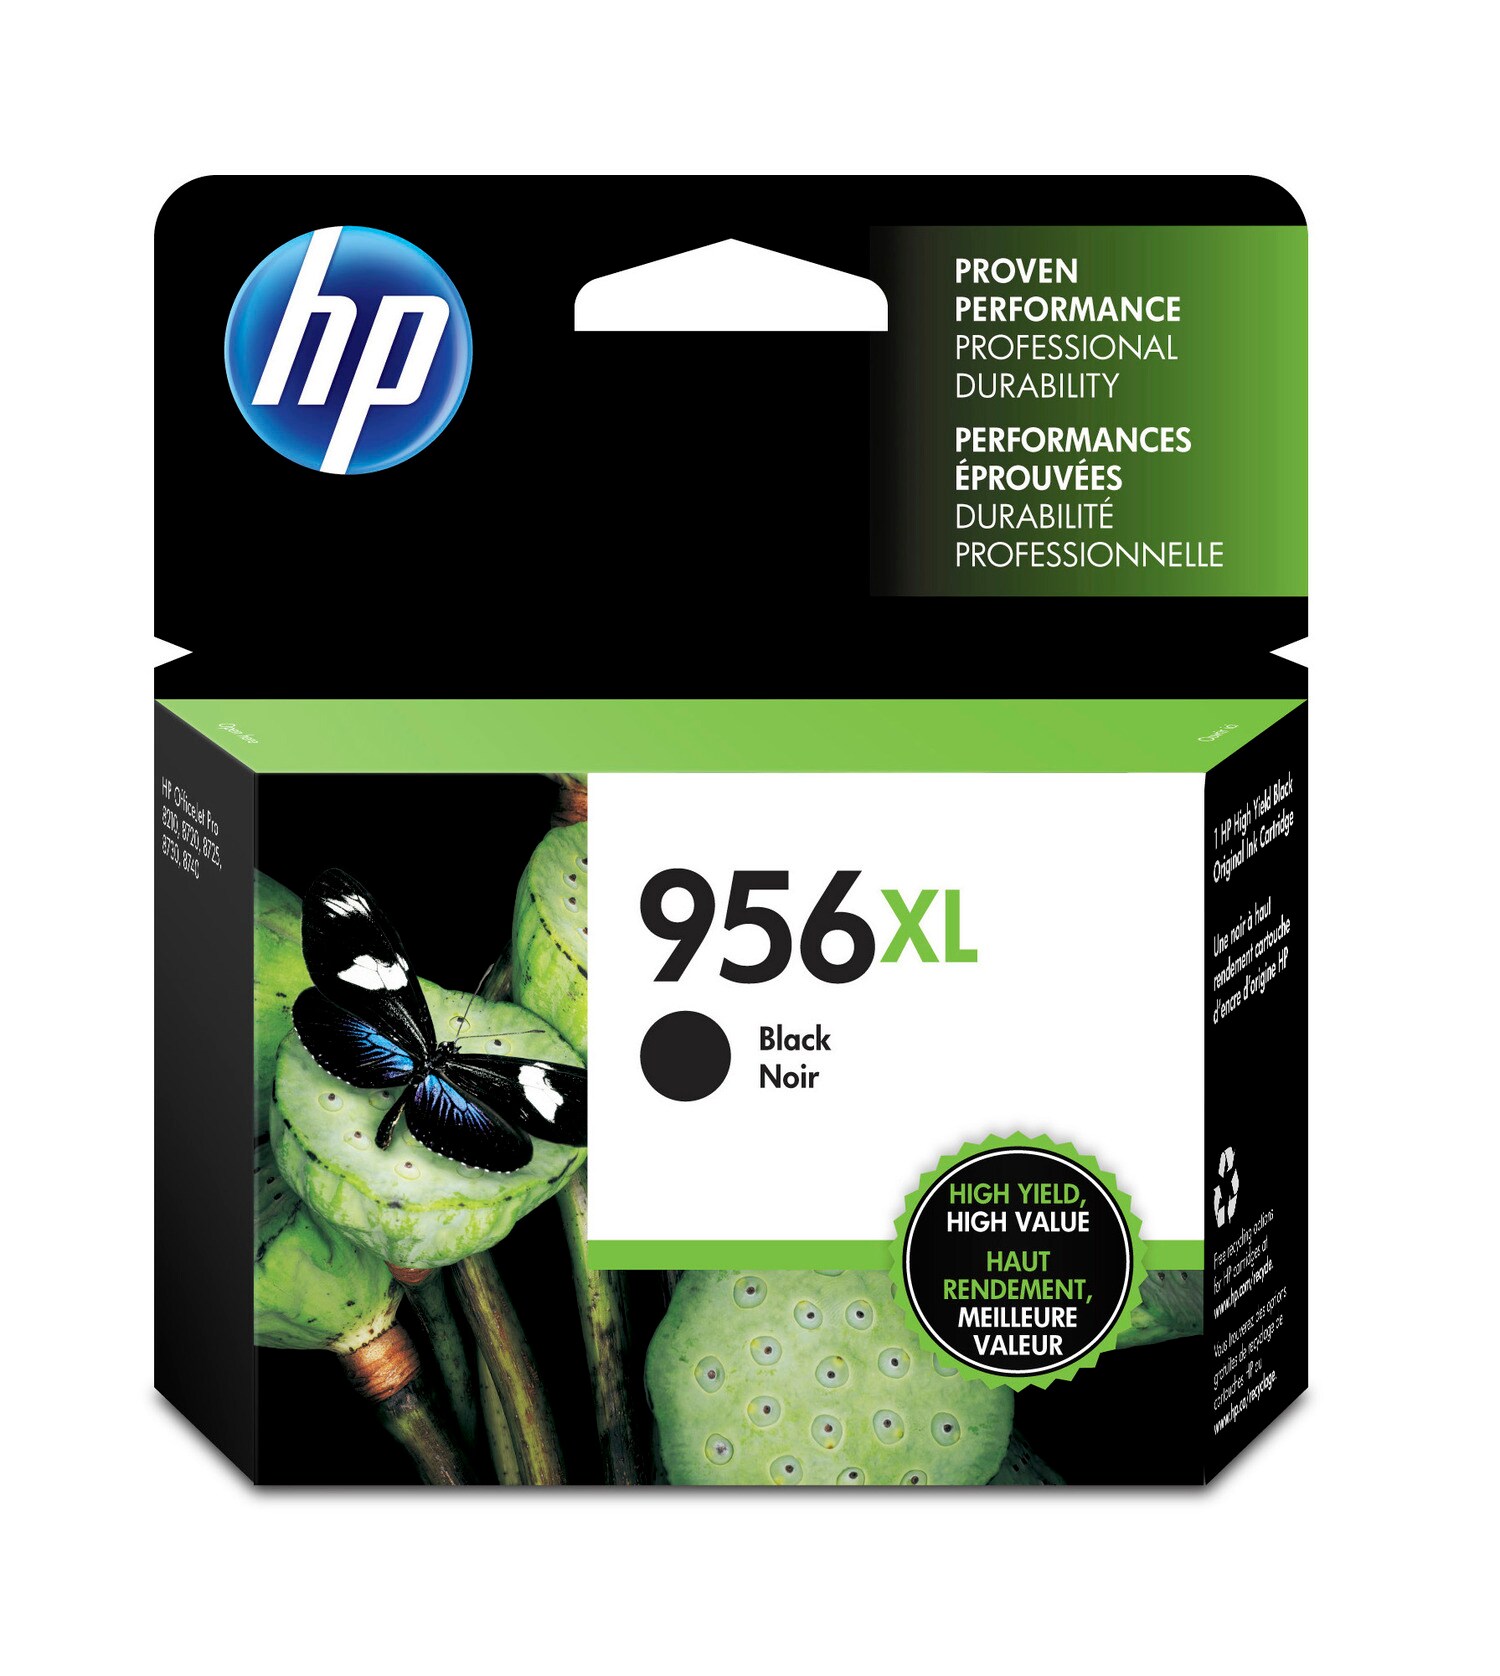 HP 956XL High Yield Black Original Ink Cartridge, ~3,000 pages, L0R39AN#140 - image 1 of 8